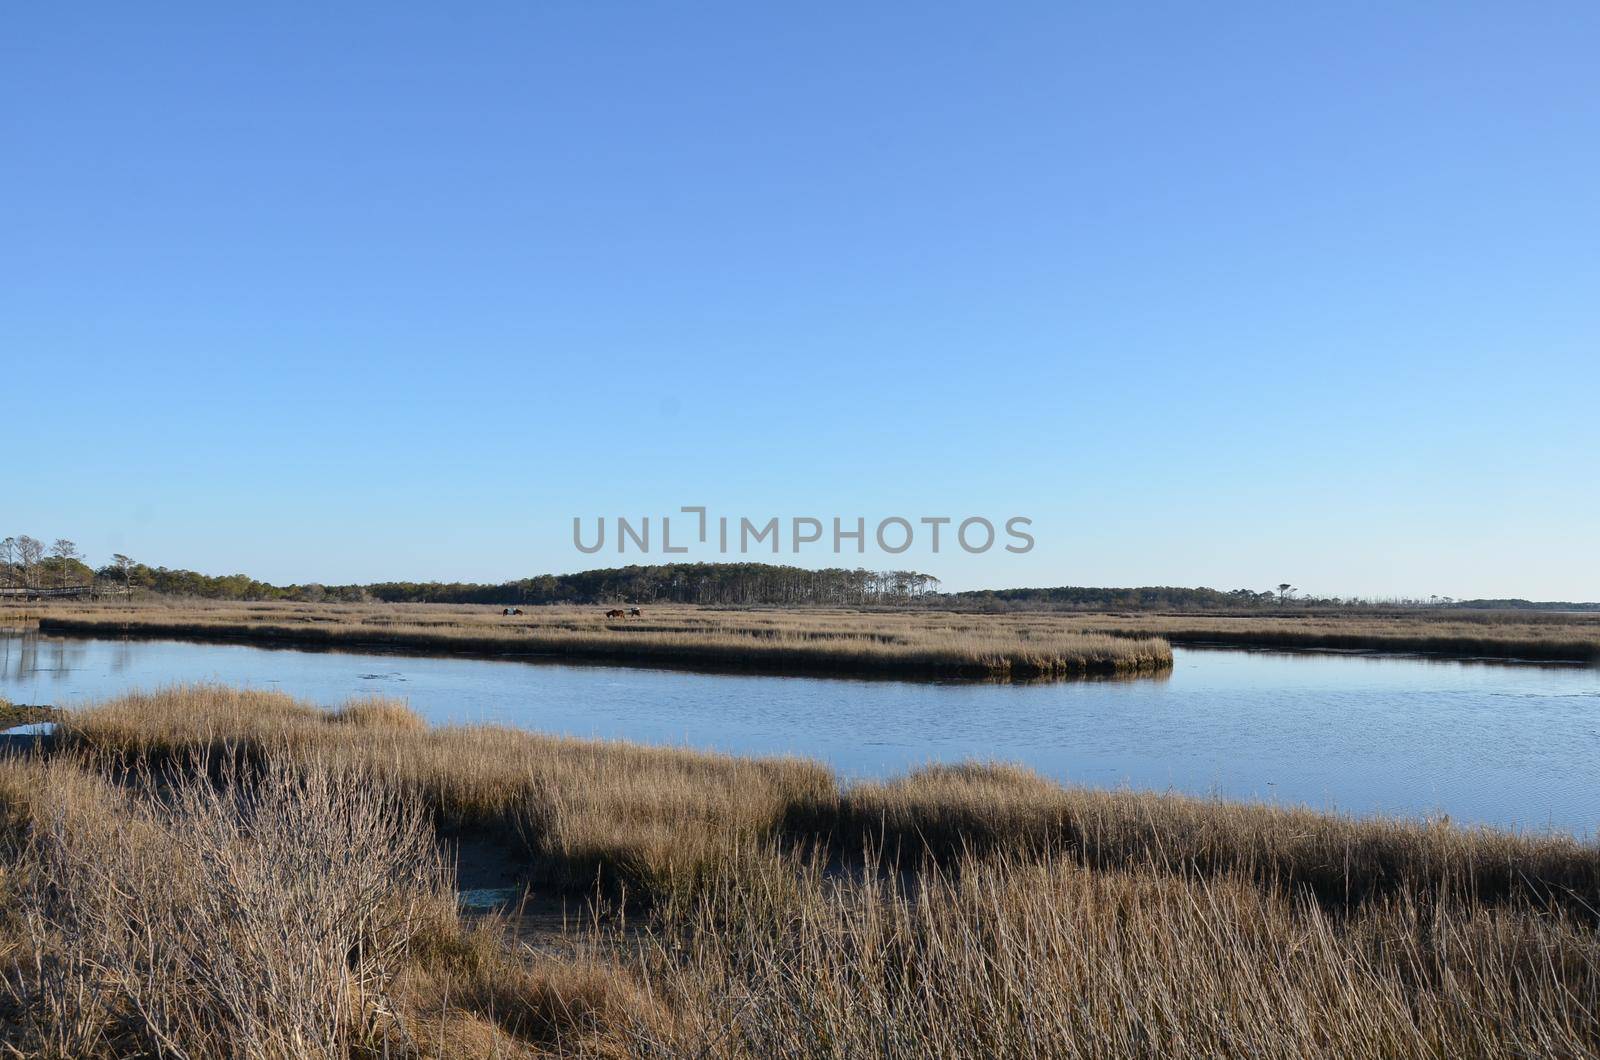 a lake or river with brown grasses and shore and horses by stockphotofan1